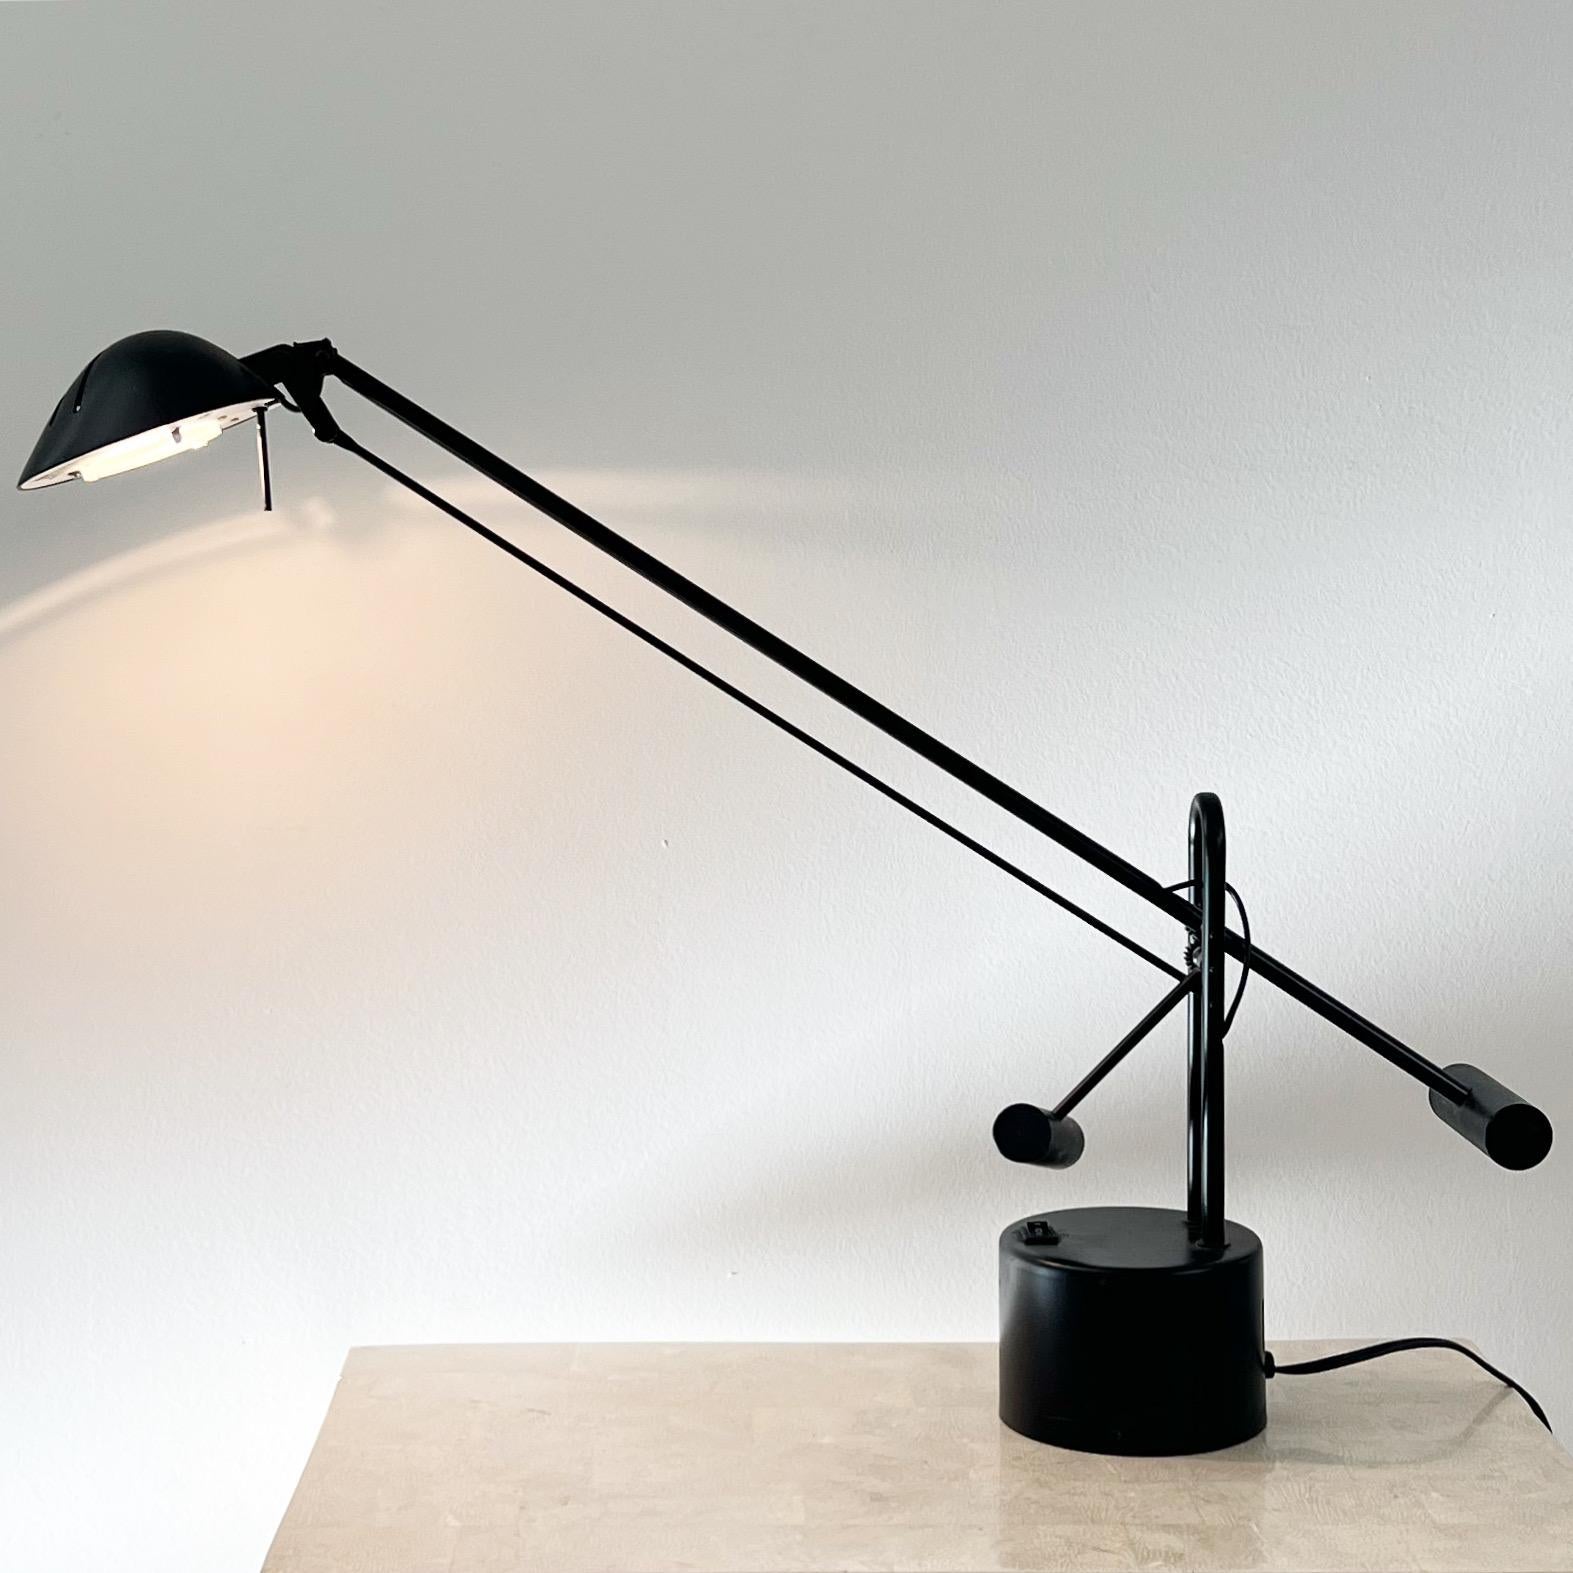 A rare modernist adjustable table lamp by Underwriters Laboratories with crane-neck, early 1970s. Height is adjustable thanks to gravity and the specifically weighted attributes of the lamp’s construction. Minor signs of age but overall truly